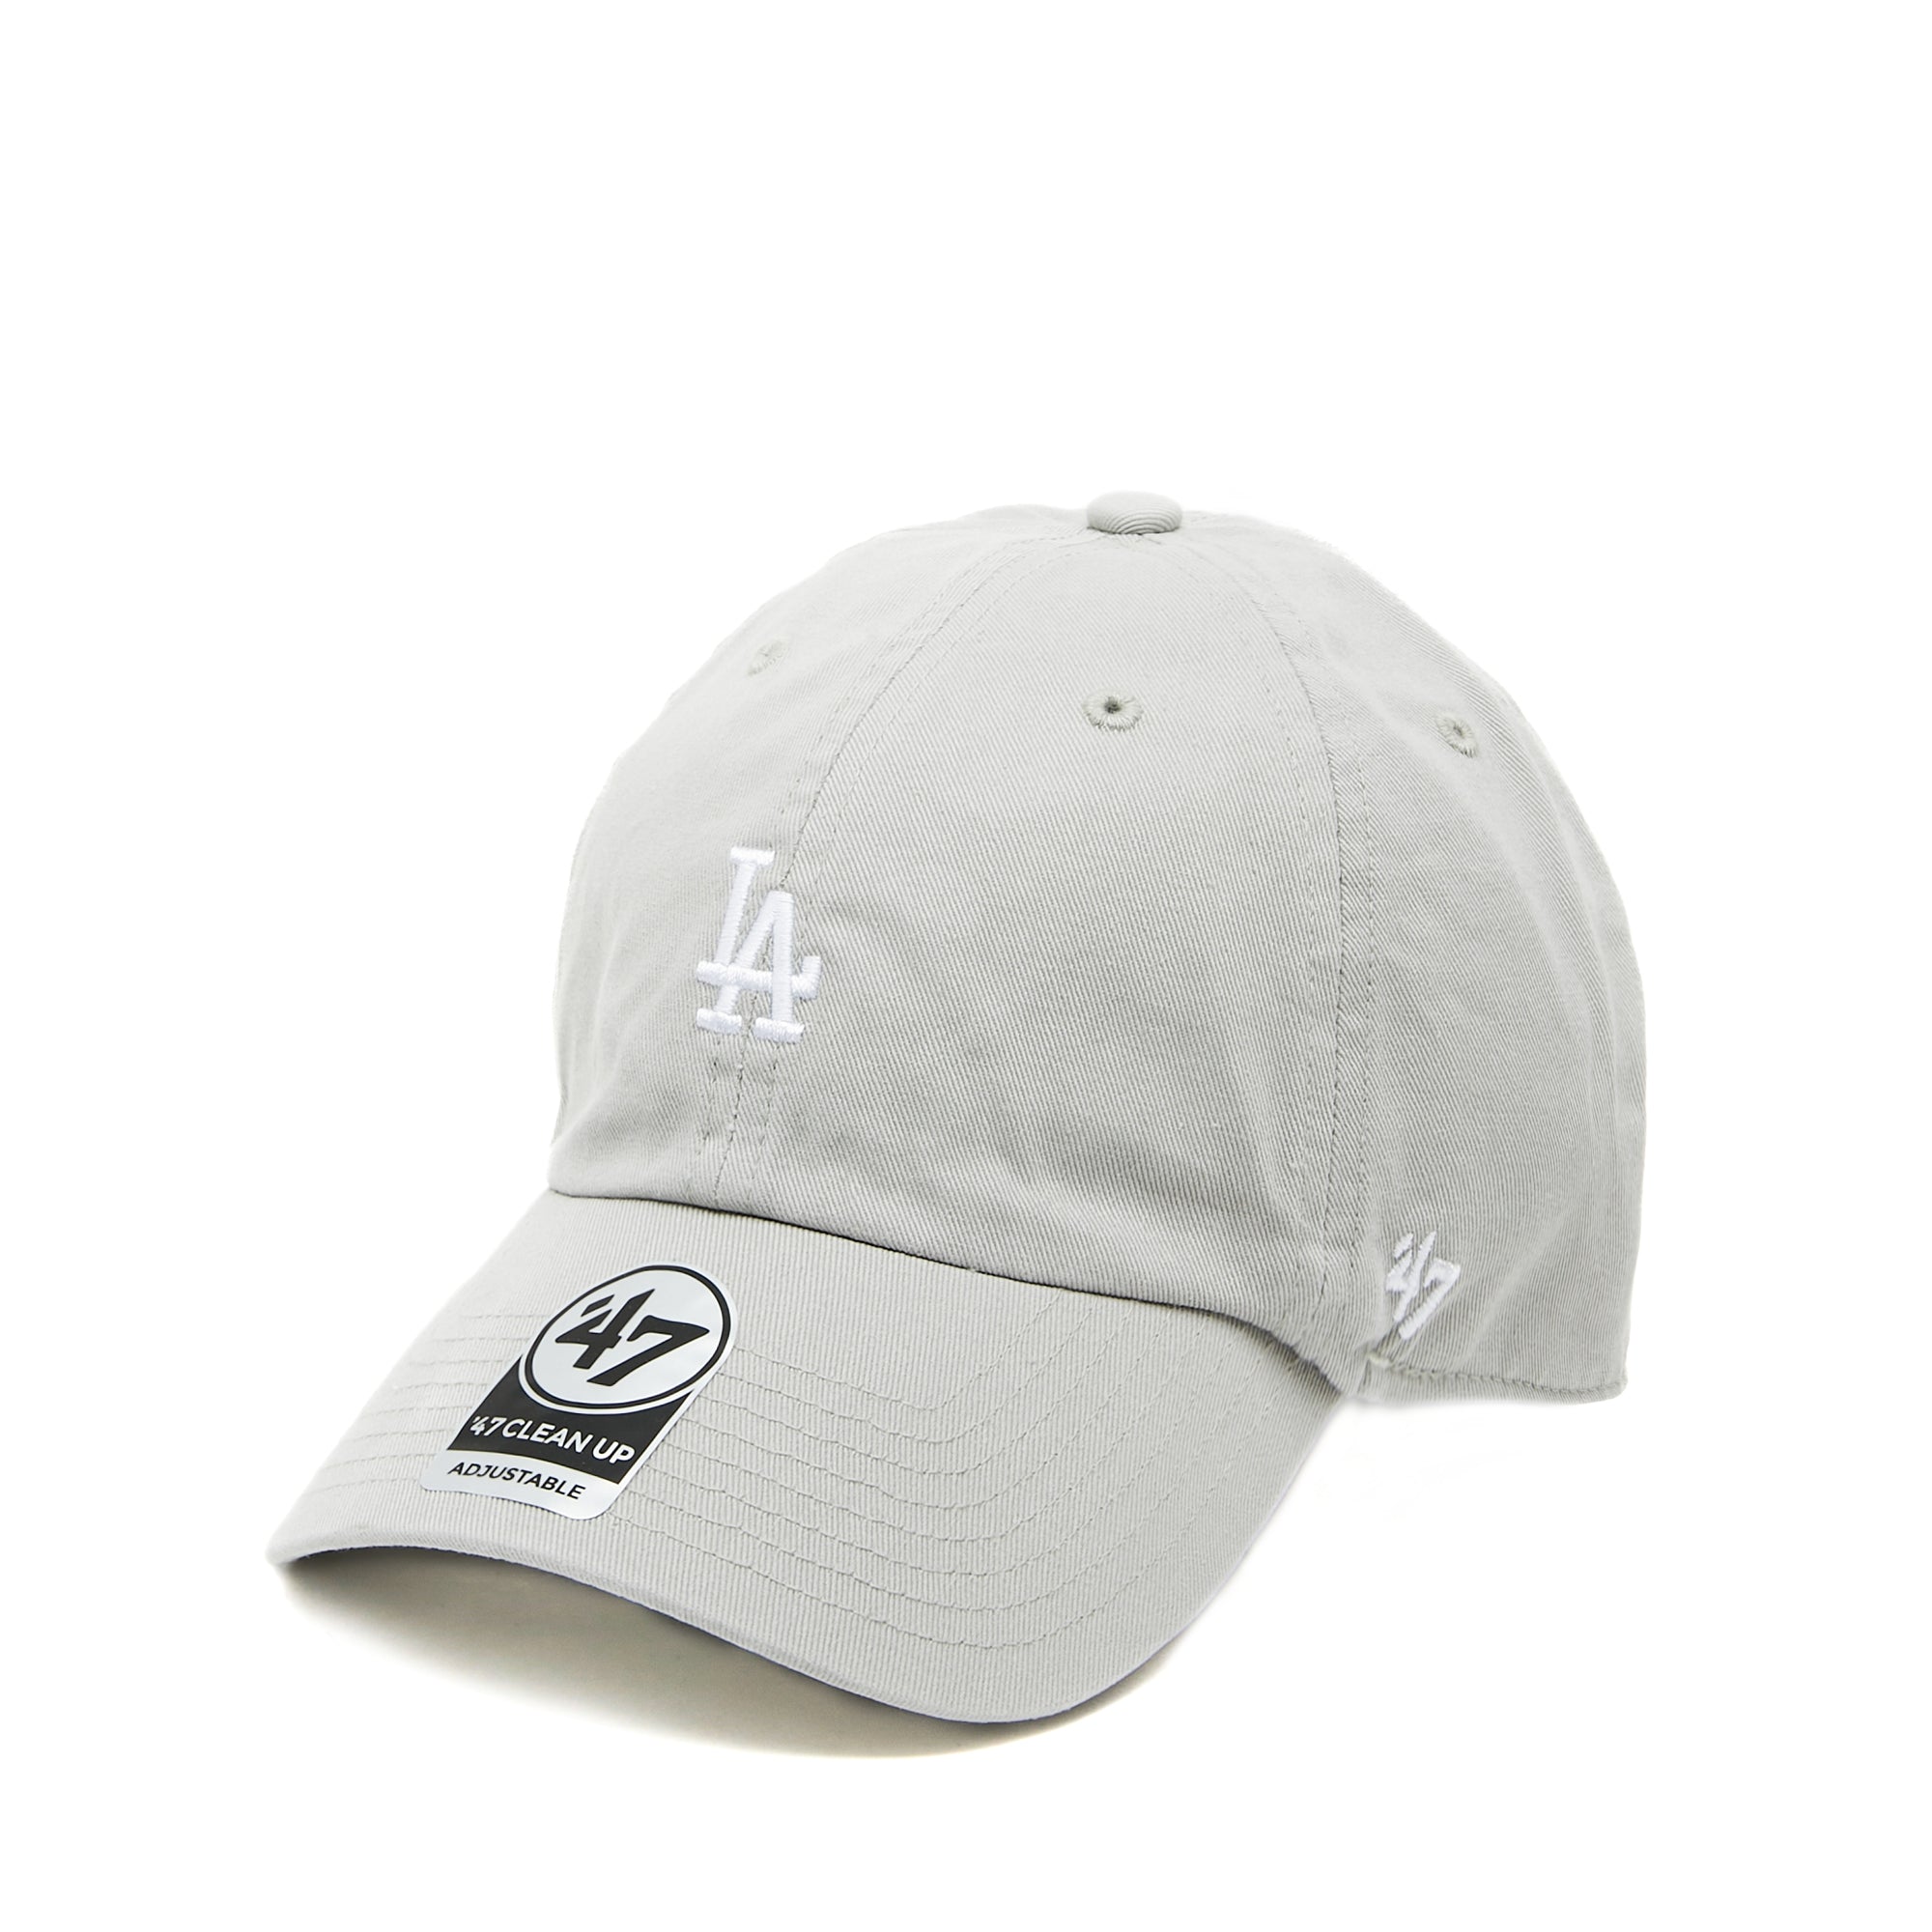 MLB Los Angeles Dodgers Base Runner Cap Grey One Size